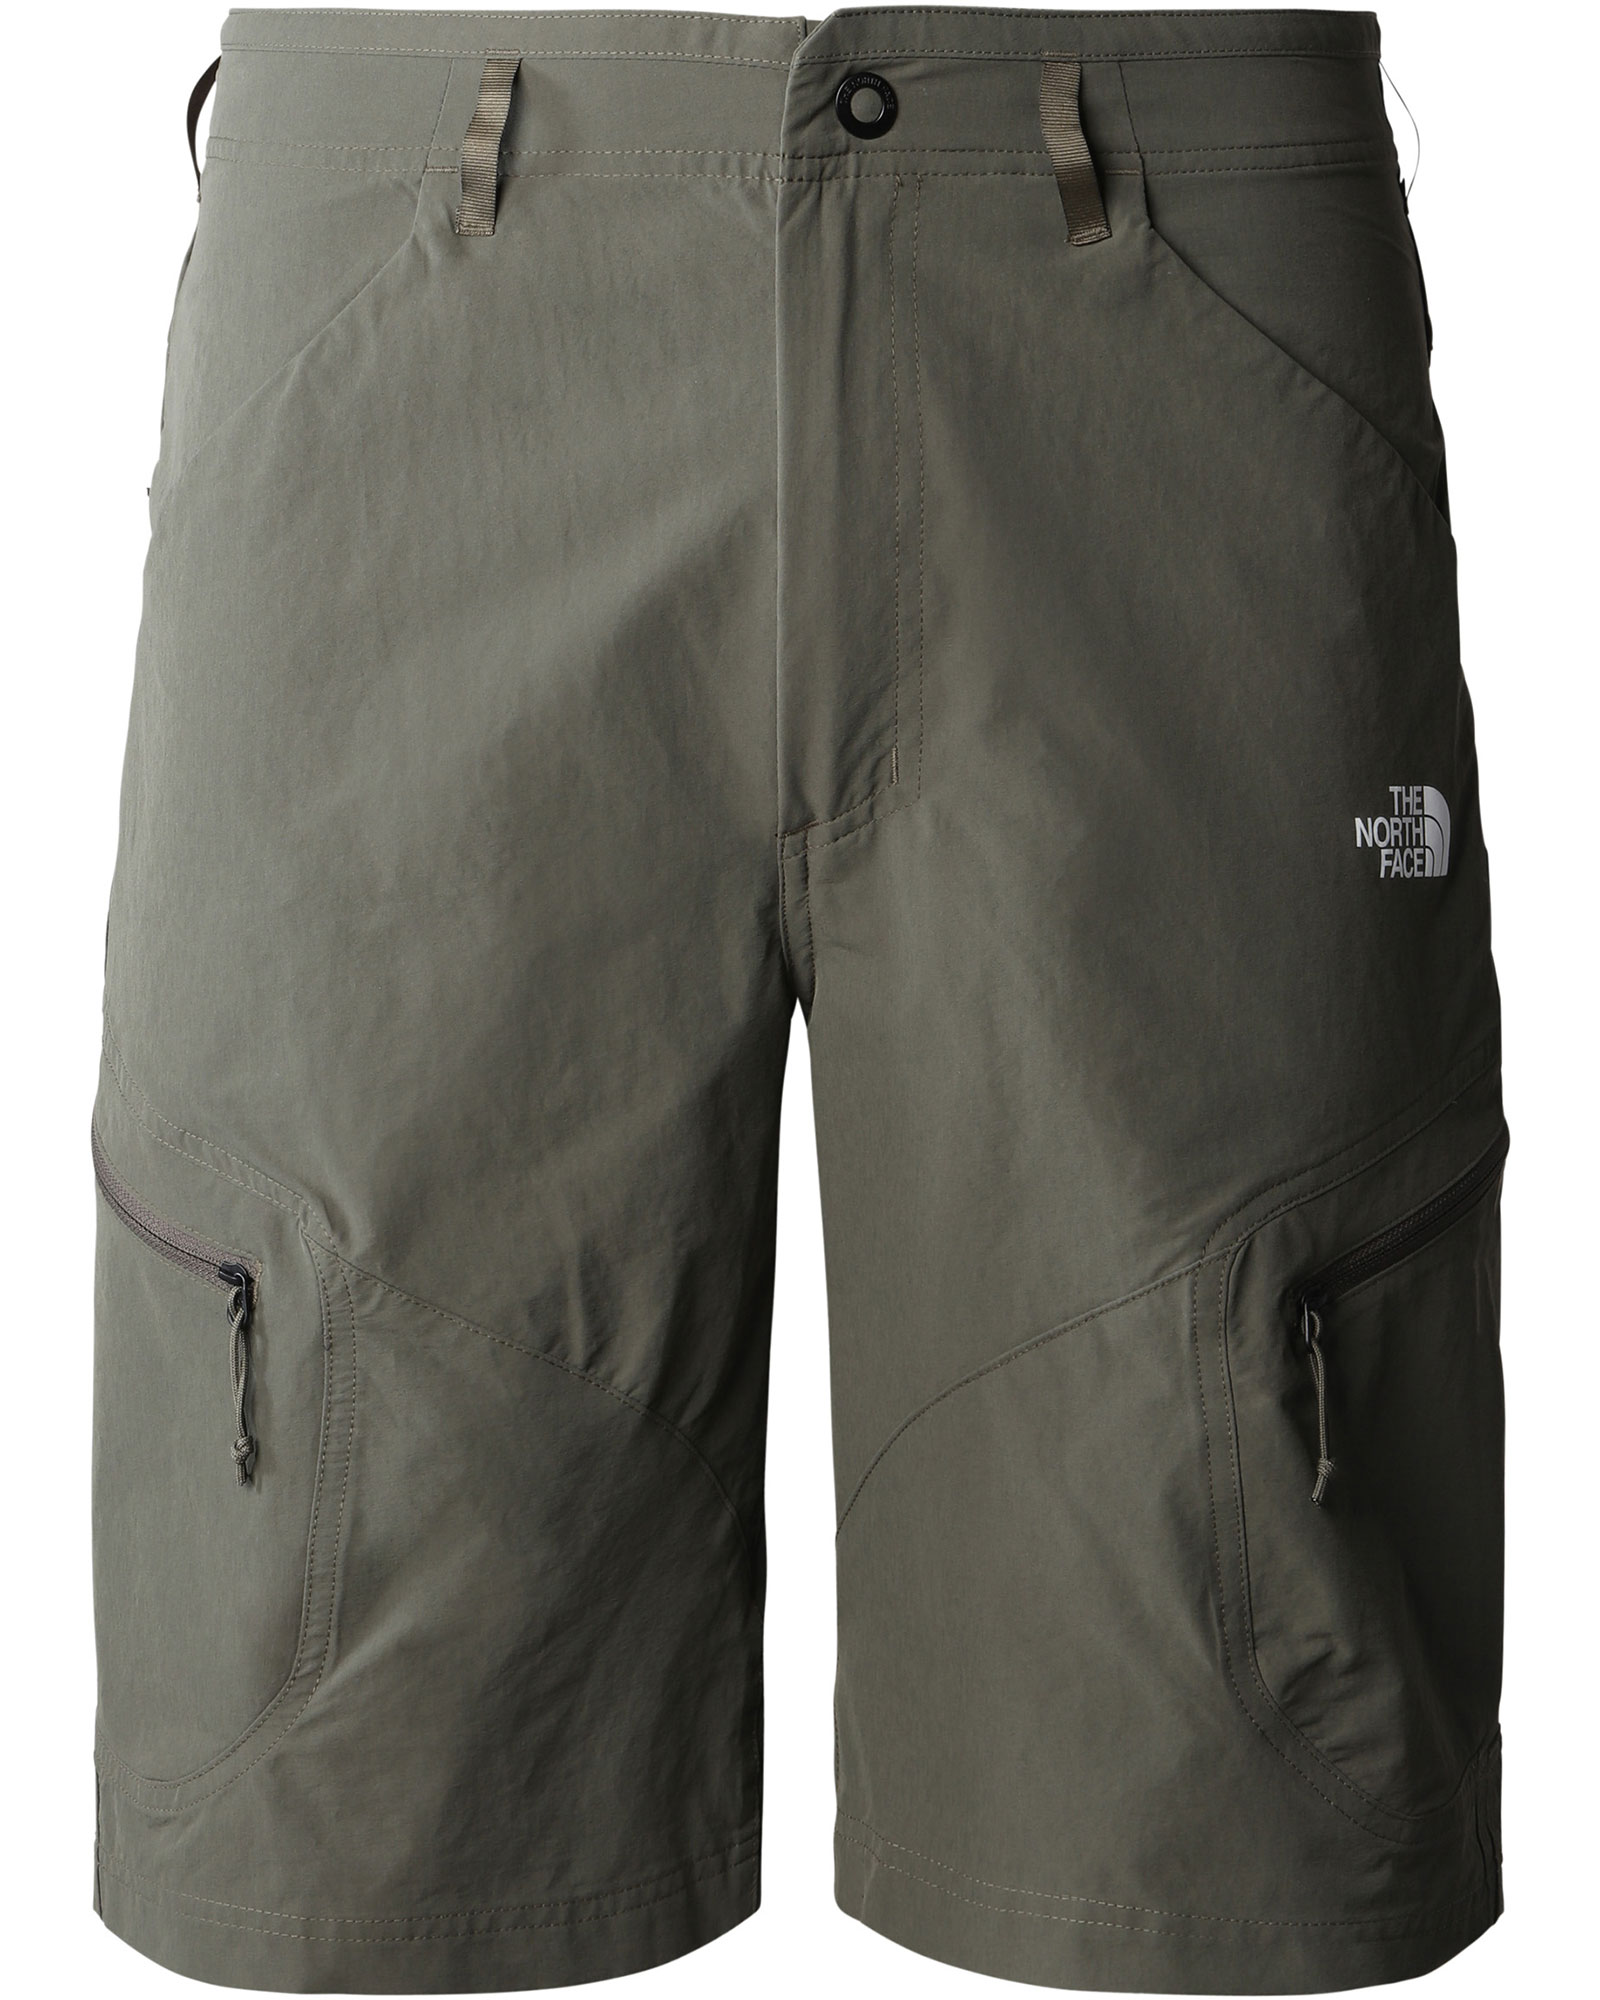 The North Face Men’s Exploration Shorts - New Taupe Green EU 36